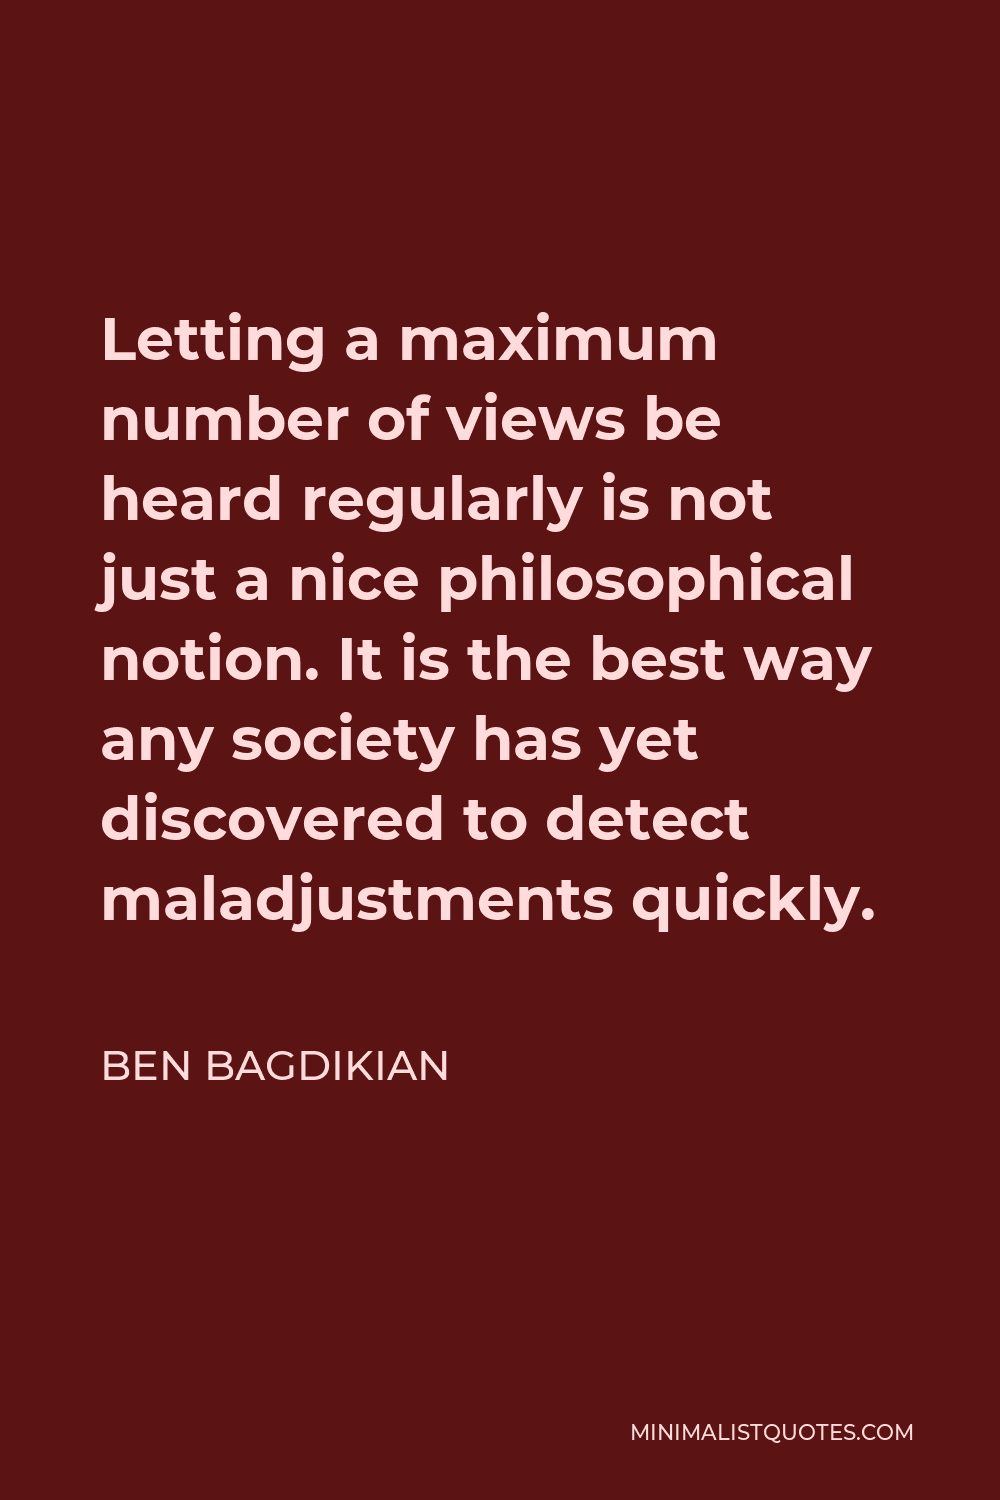 Ben Bagdikian Quote - Letting a maximum number of views be heard regularly is not just a nice philosophical notion. It is the best way any society has yet discovered to detect maladjustments quickly.